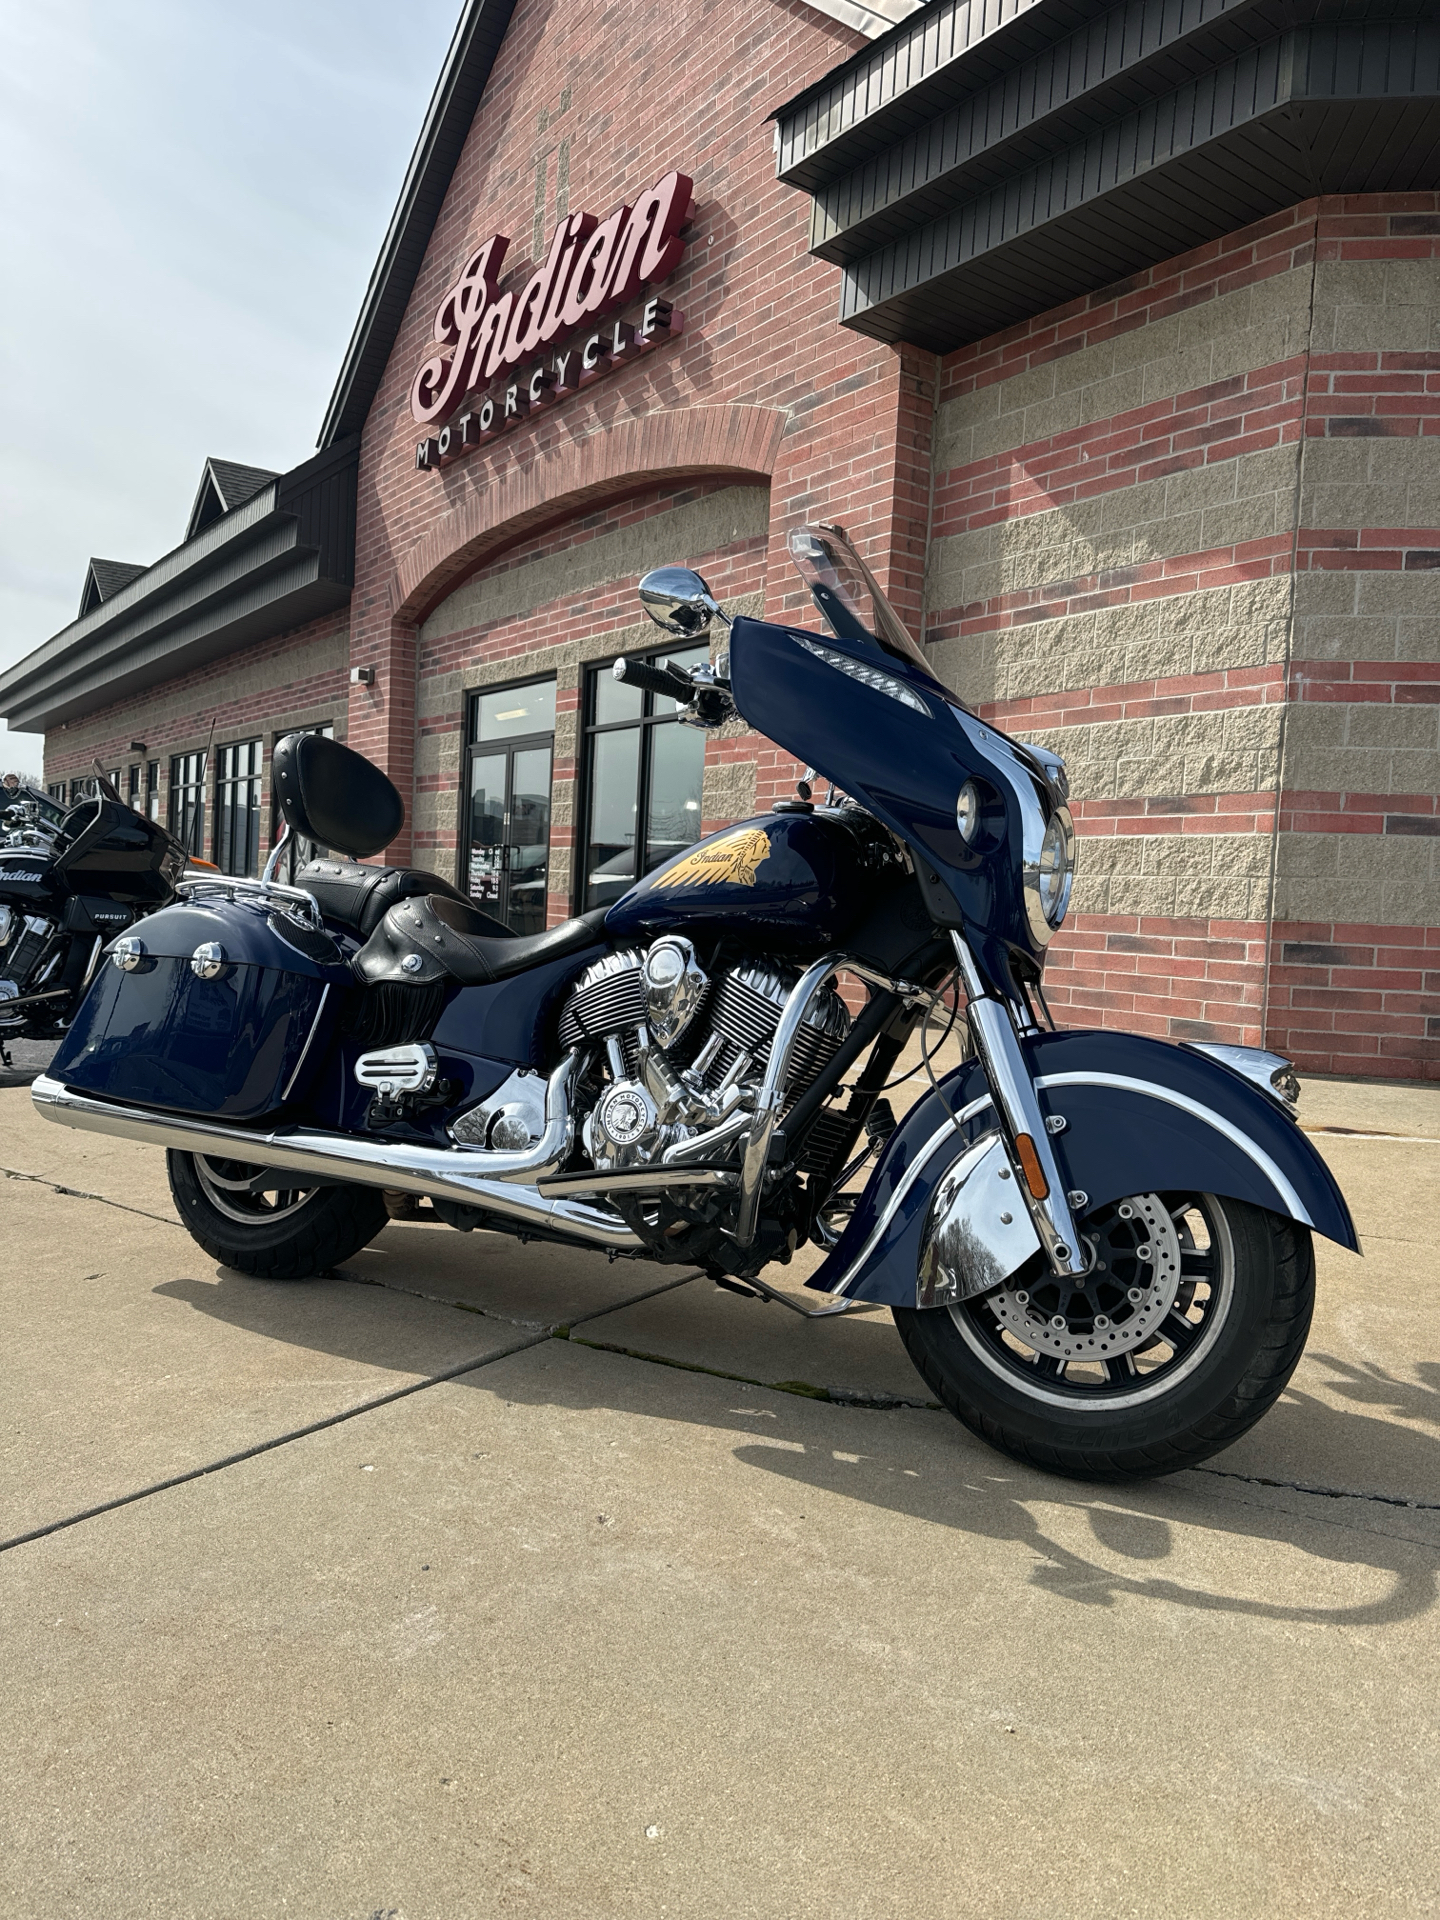 2014 Indian Motorcycle Chieftain™ in Muskego, Wisconsin - Photo 2